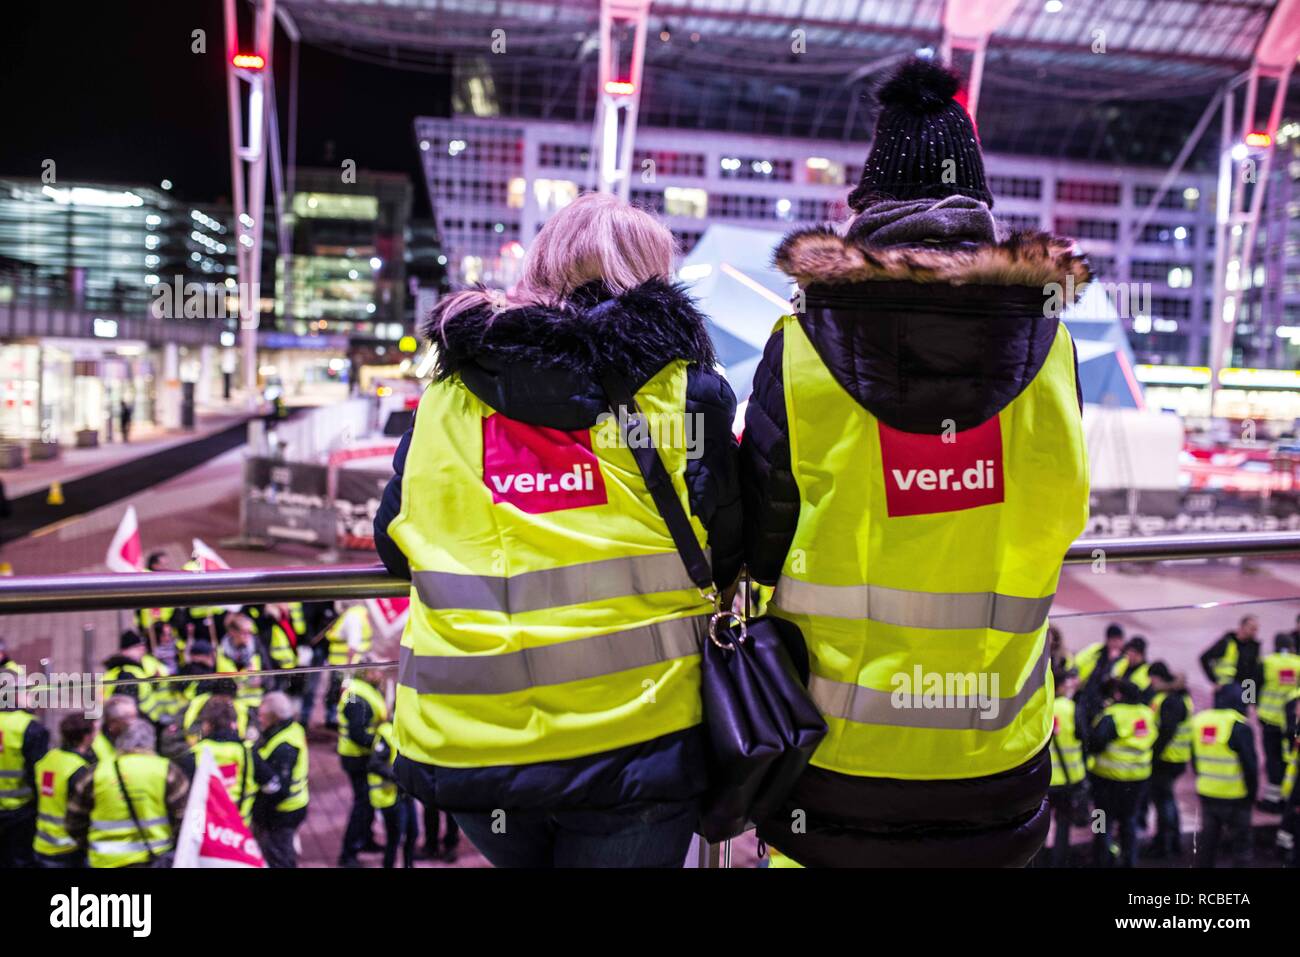 Munich, Bavaria, Germany. 15th Jan, 2019. Citing a breakdown in talks with employers on December 21st, the German Ver.di union organized the latest warning strike in a series at the Munich International Airport with members employed in Airport Security Services (Luftsicherheit) walking out from 3:30am to 24:00. The union is demanding 20 Euros per hour for their 1,000 total members working in Passenger-, Freight, Personnel, and Goods Control of Airport Security, along with recertification to bring other members to the same level. They are also requesting other members receive 'substanti Stock Photo